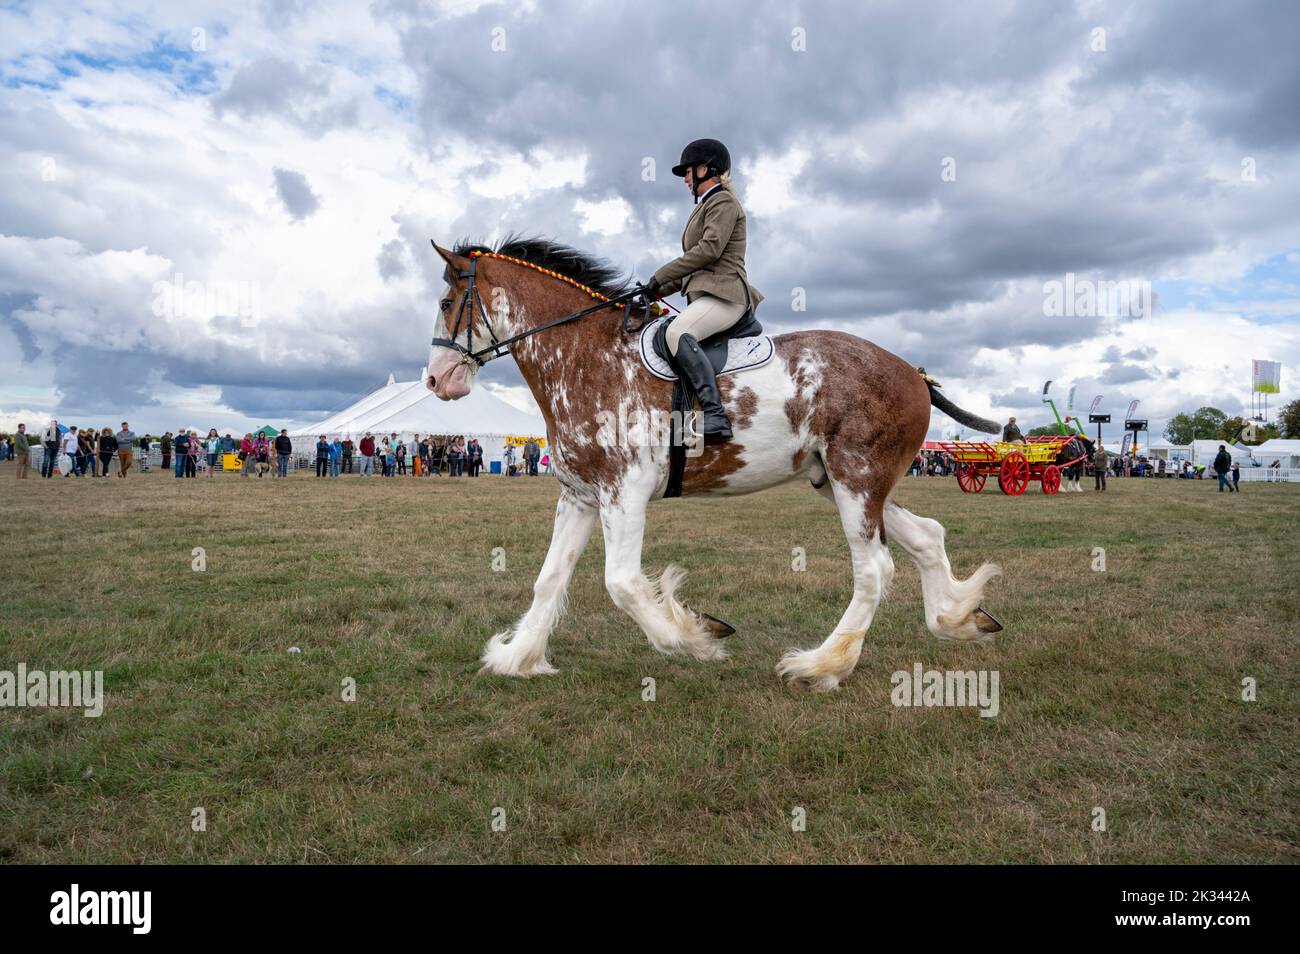 Great Gransden Cambridgeshire, UK. 24th Sep, 2022. A woman rides Eddie a 4 year old Clydesdale heavy horse at the Gransden and District Agricultural Society Show. The annual show includes displays of livestock, rural arts and crafts, food and trade stalls. Credit: Julian Eales/Alamy Live News Stock Photo